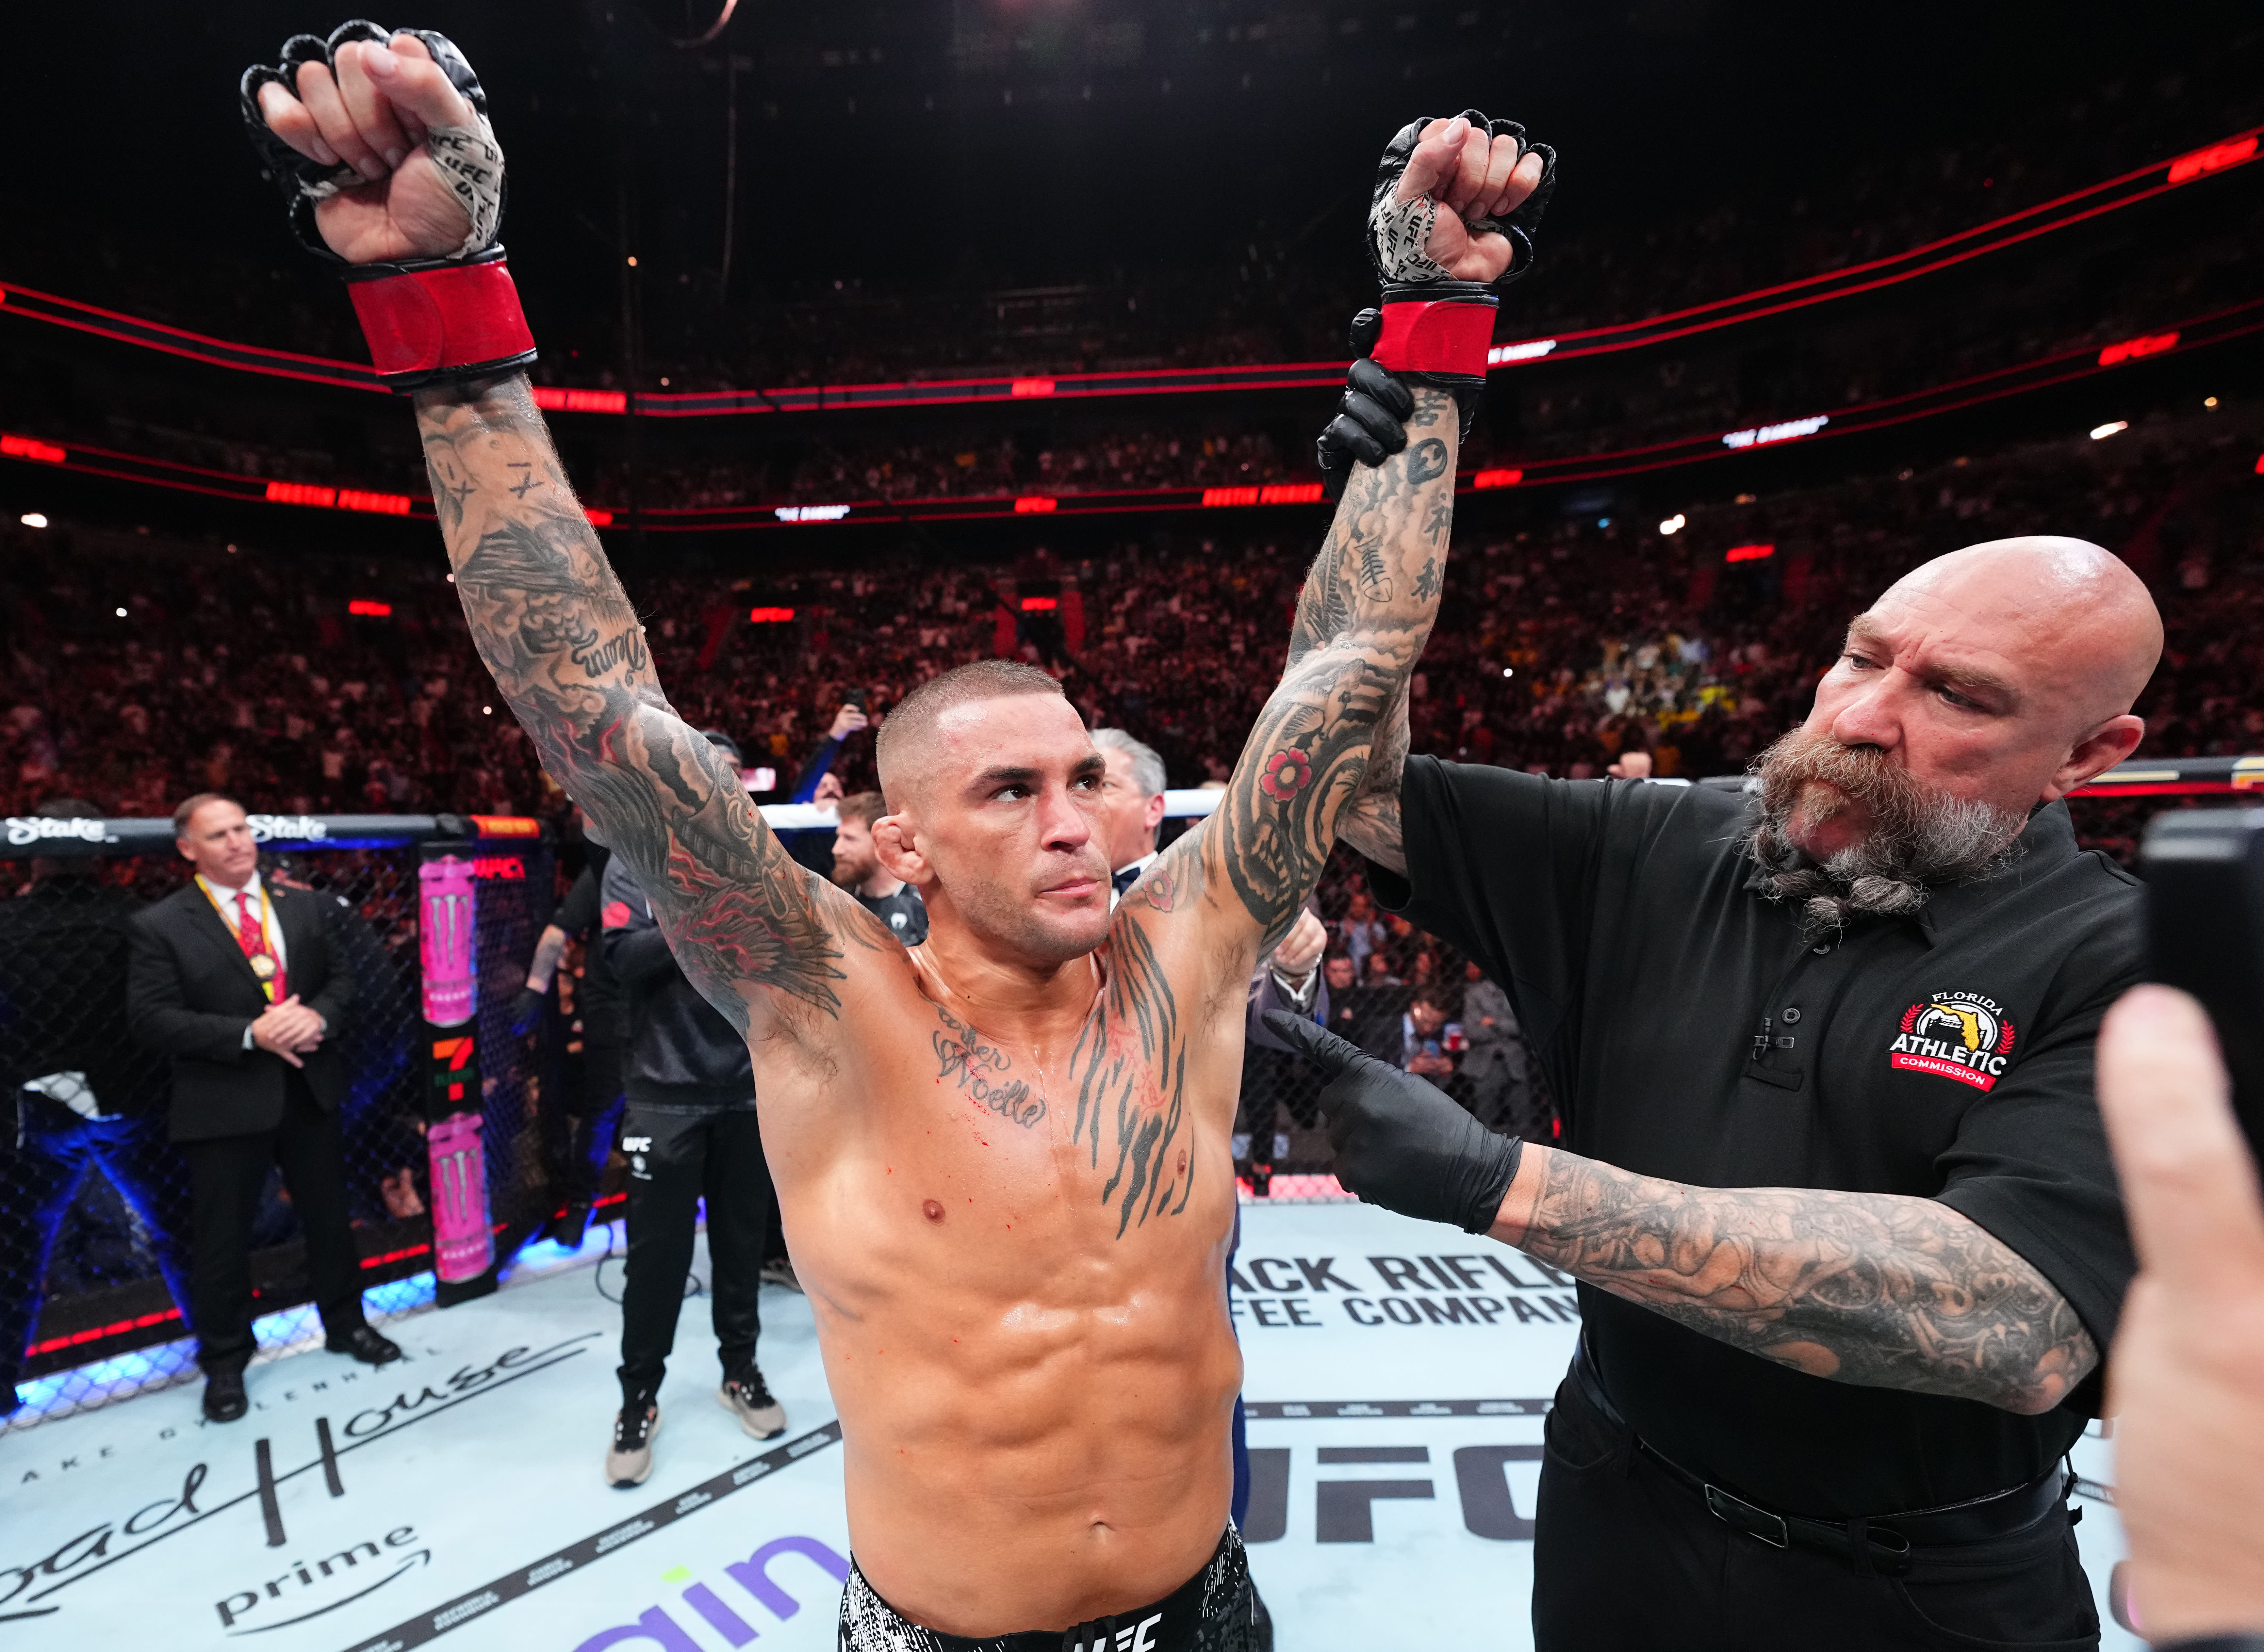 UFC 302 main card: Why each fight matters, including Dustin Poirier's underdog tale vs. Islam Makhachev